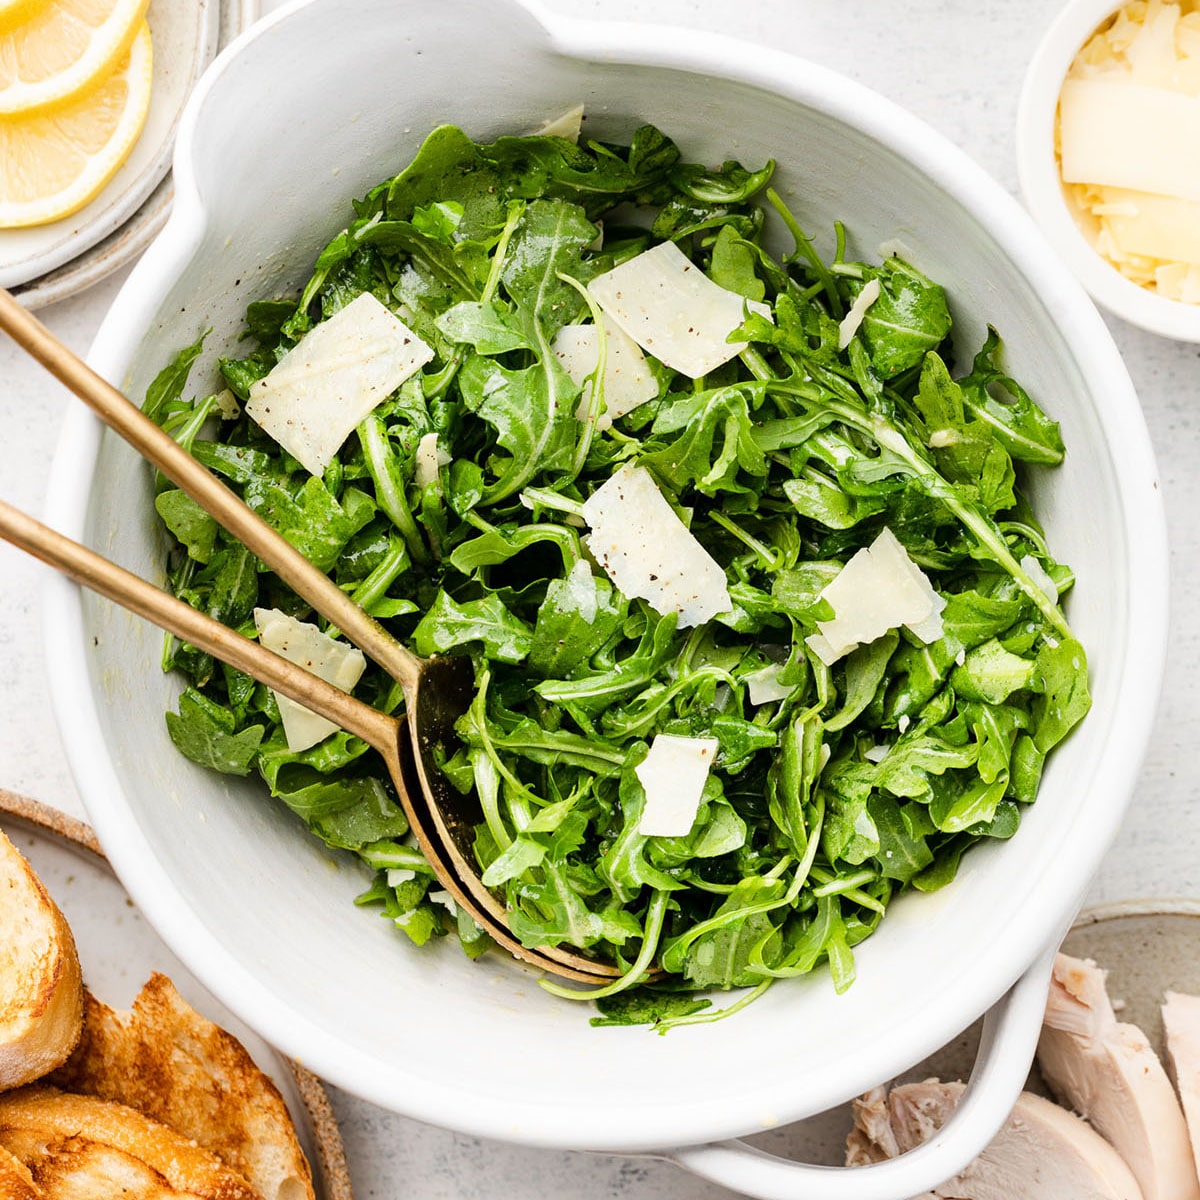 Arugula salad in a large white bowl with two serving forks.